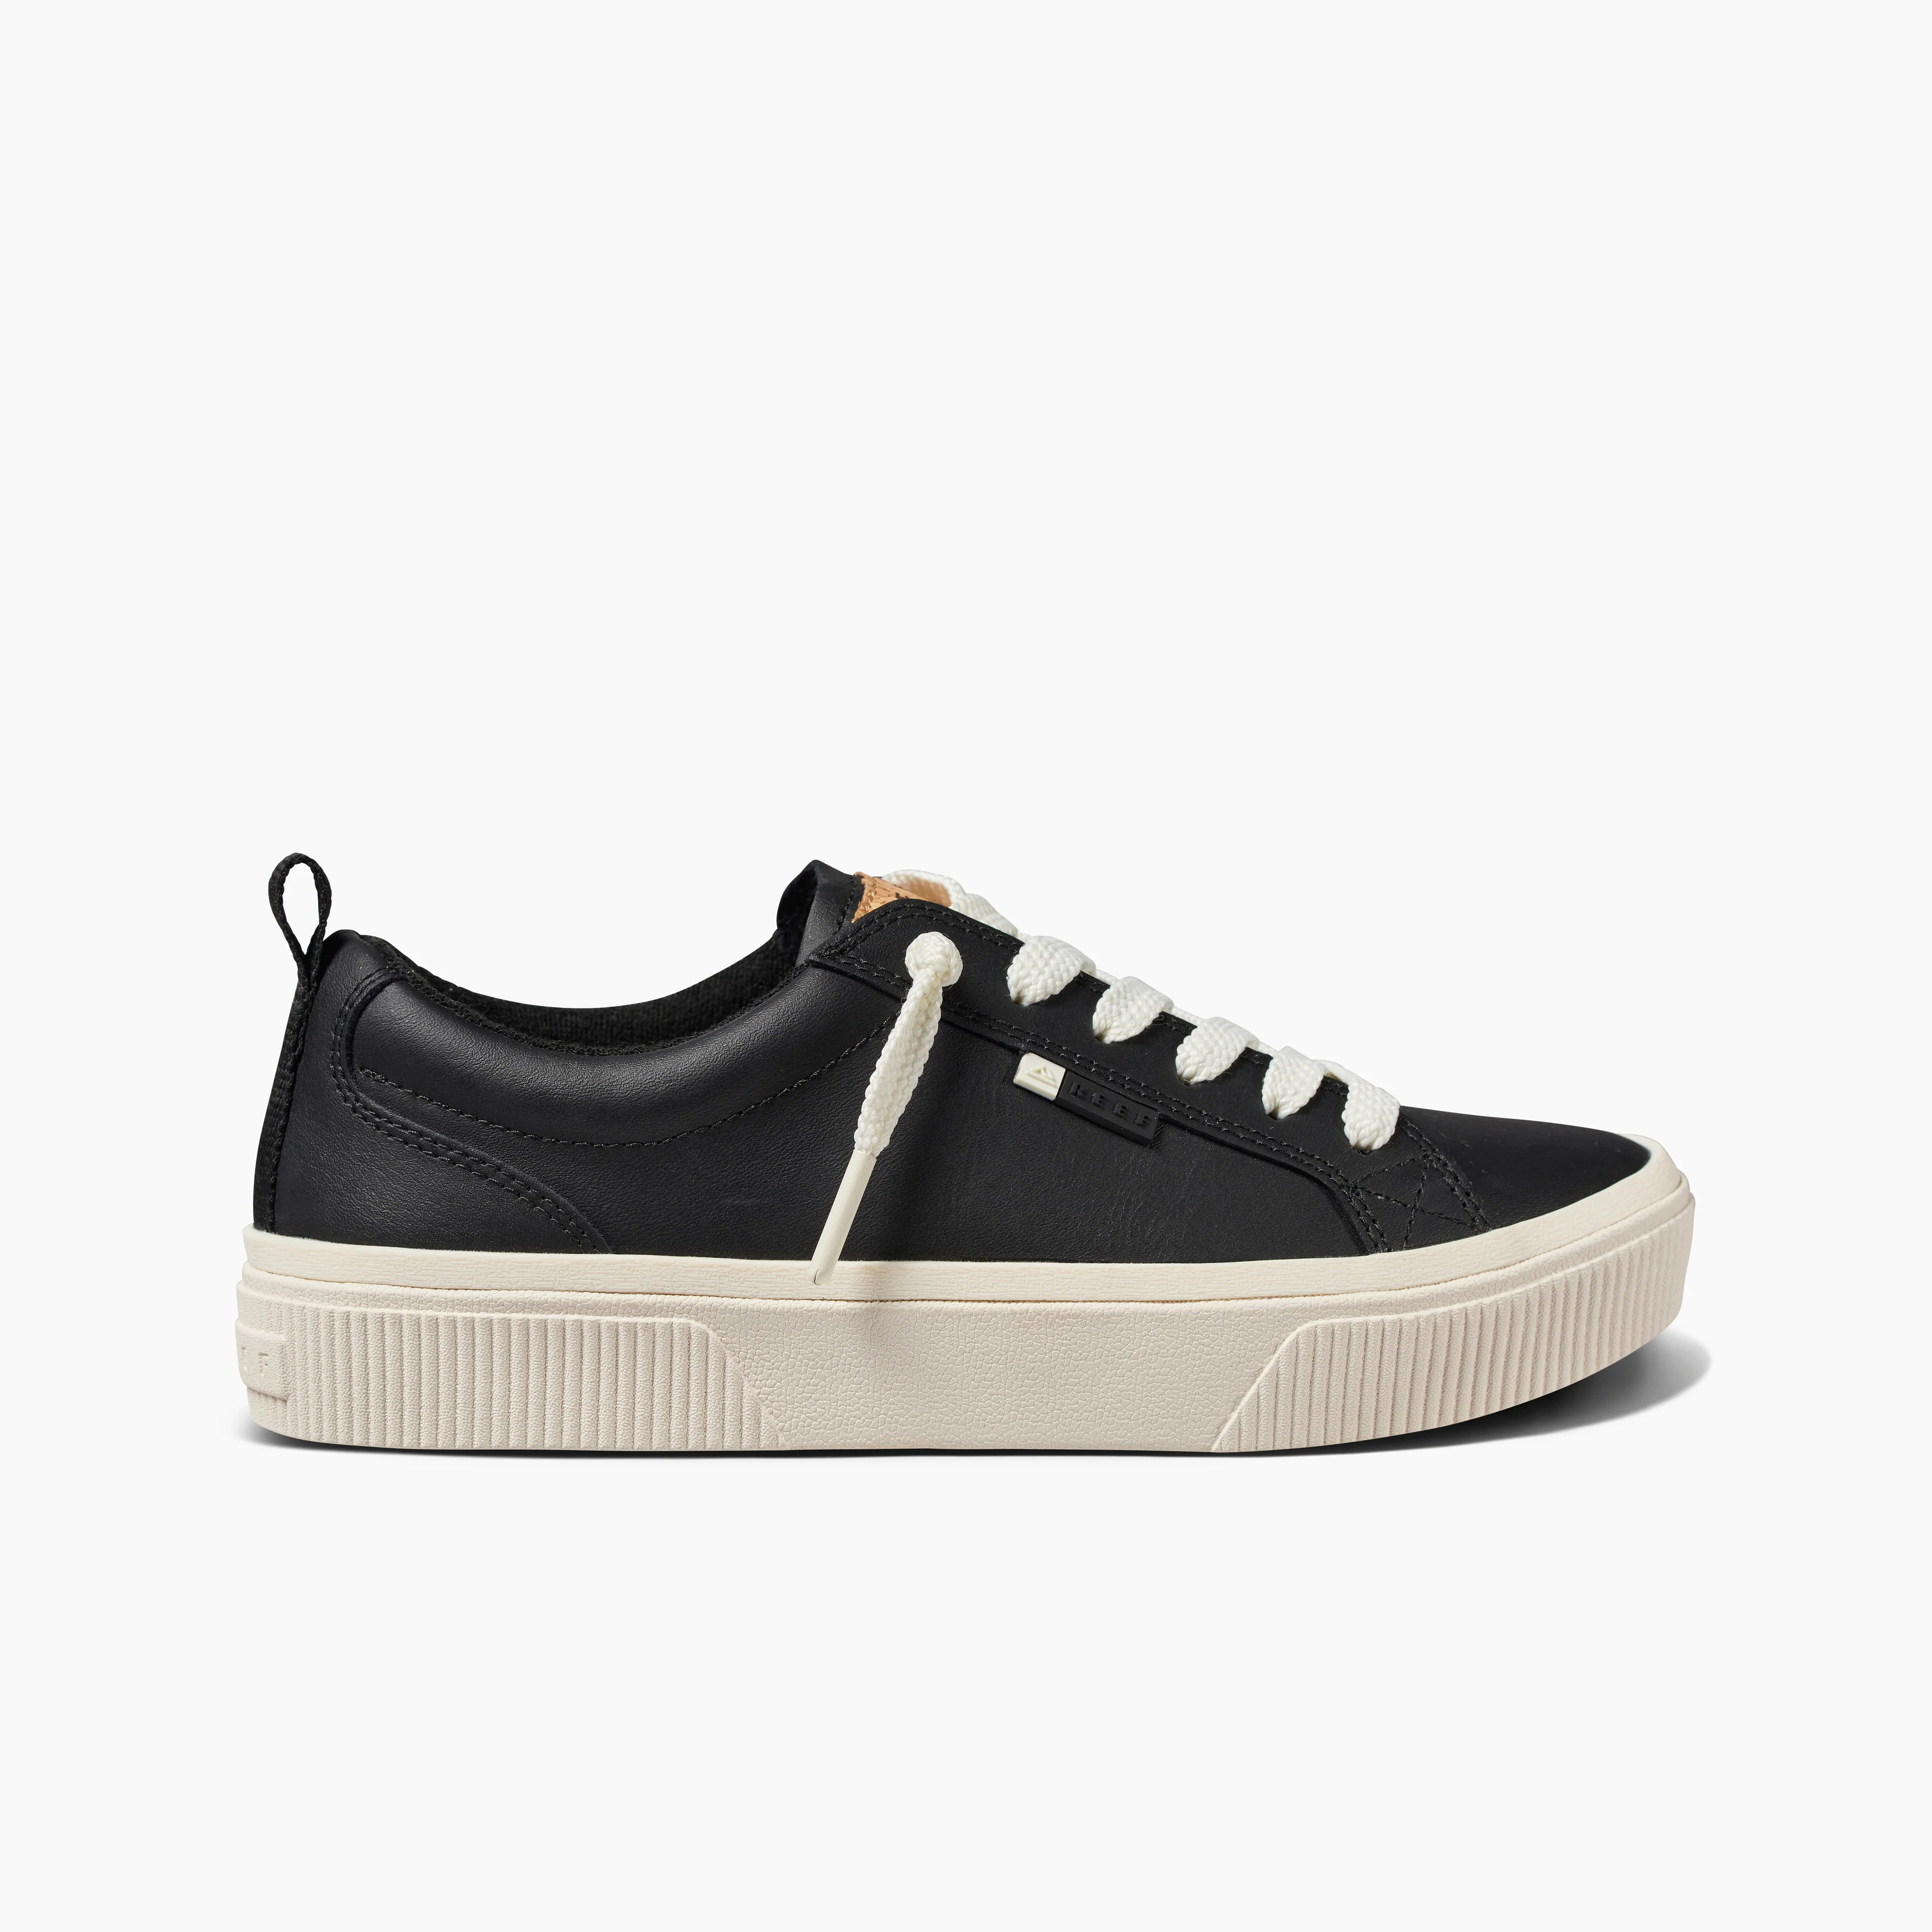 Lay Day Dawn: Women's Black Leather Sneakers side view